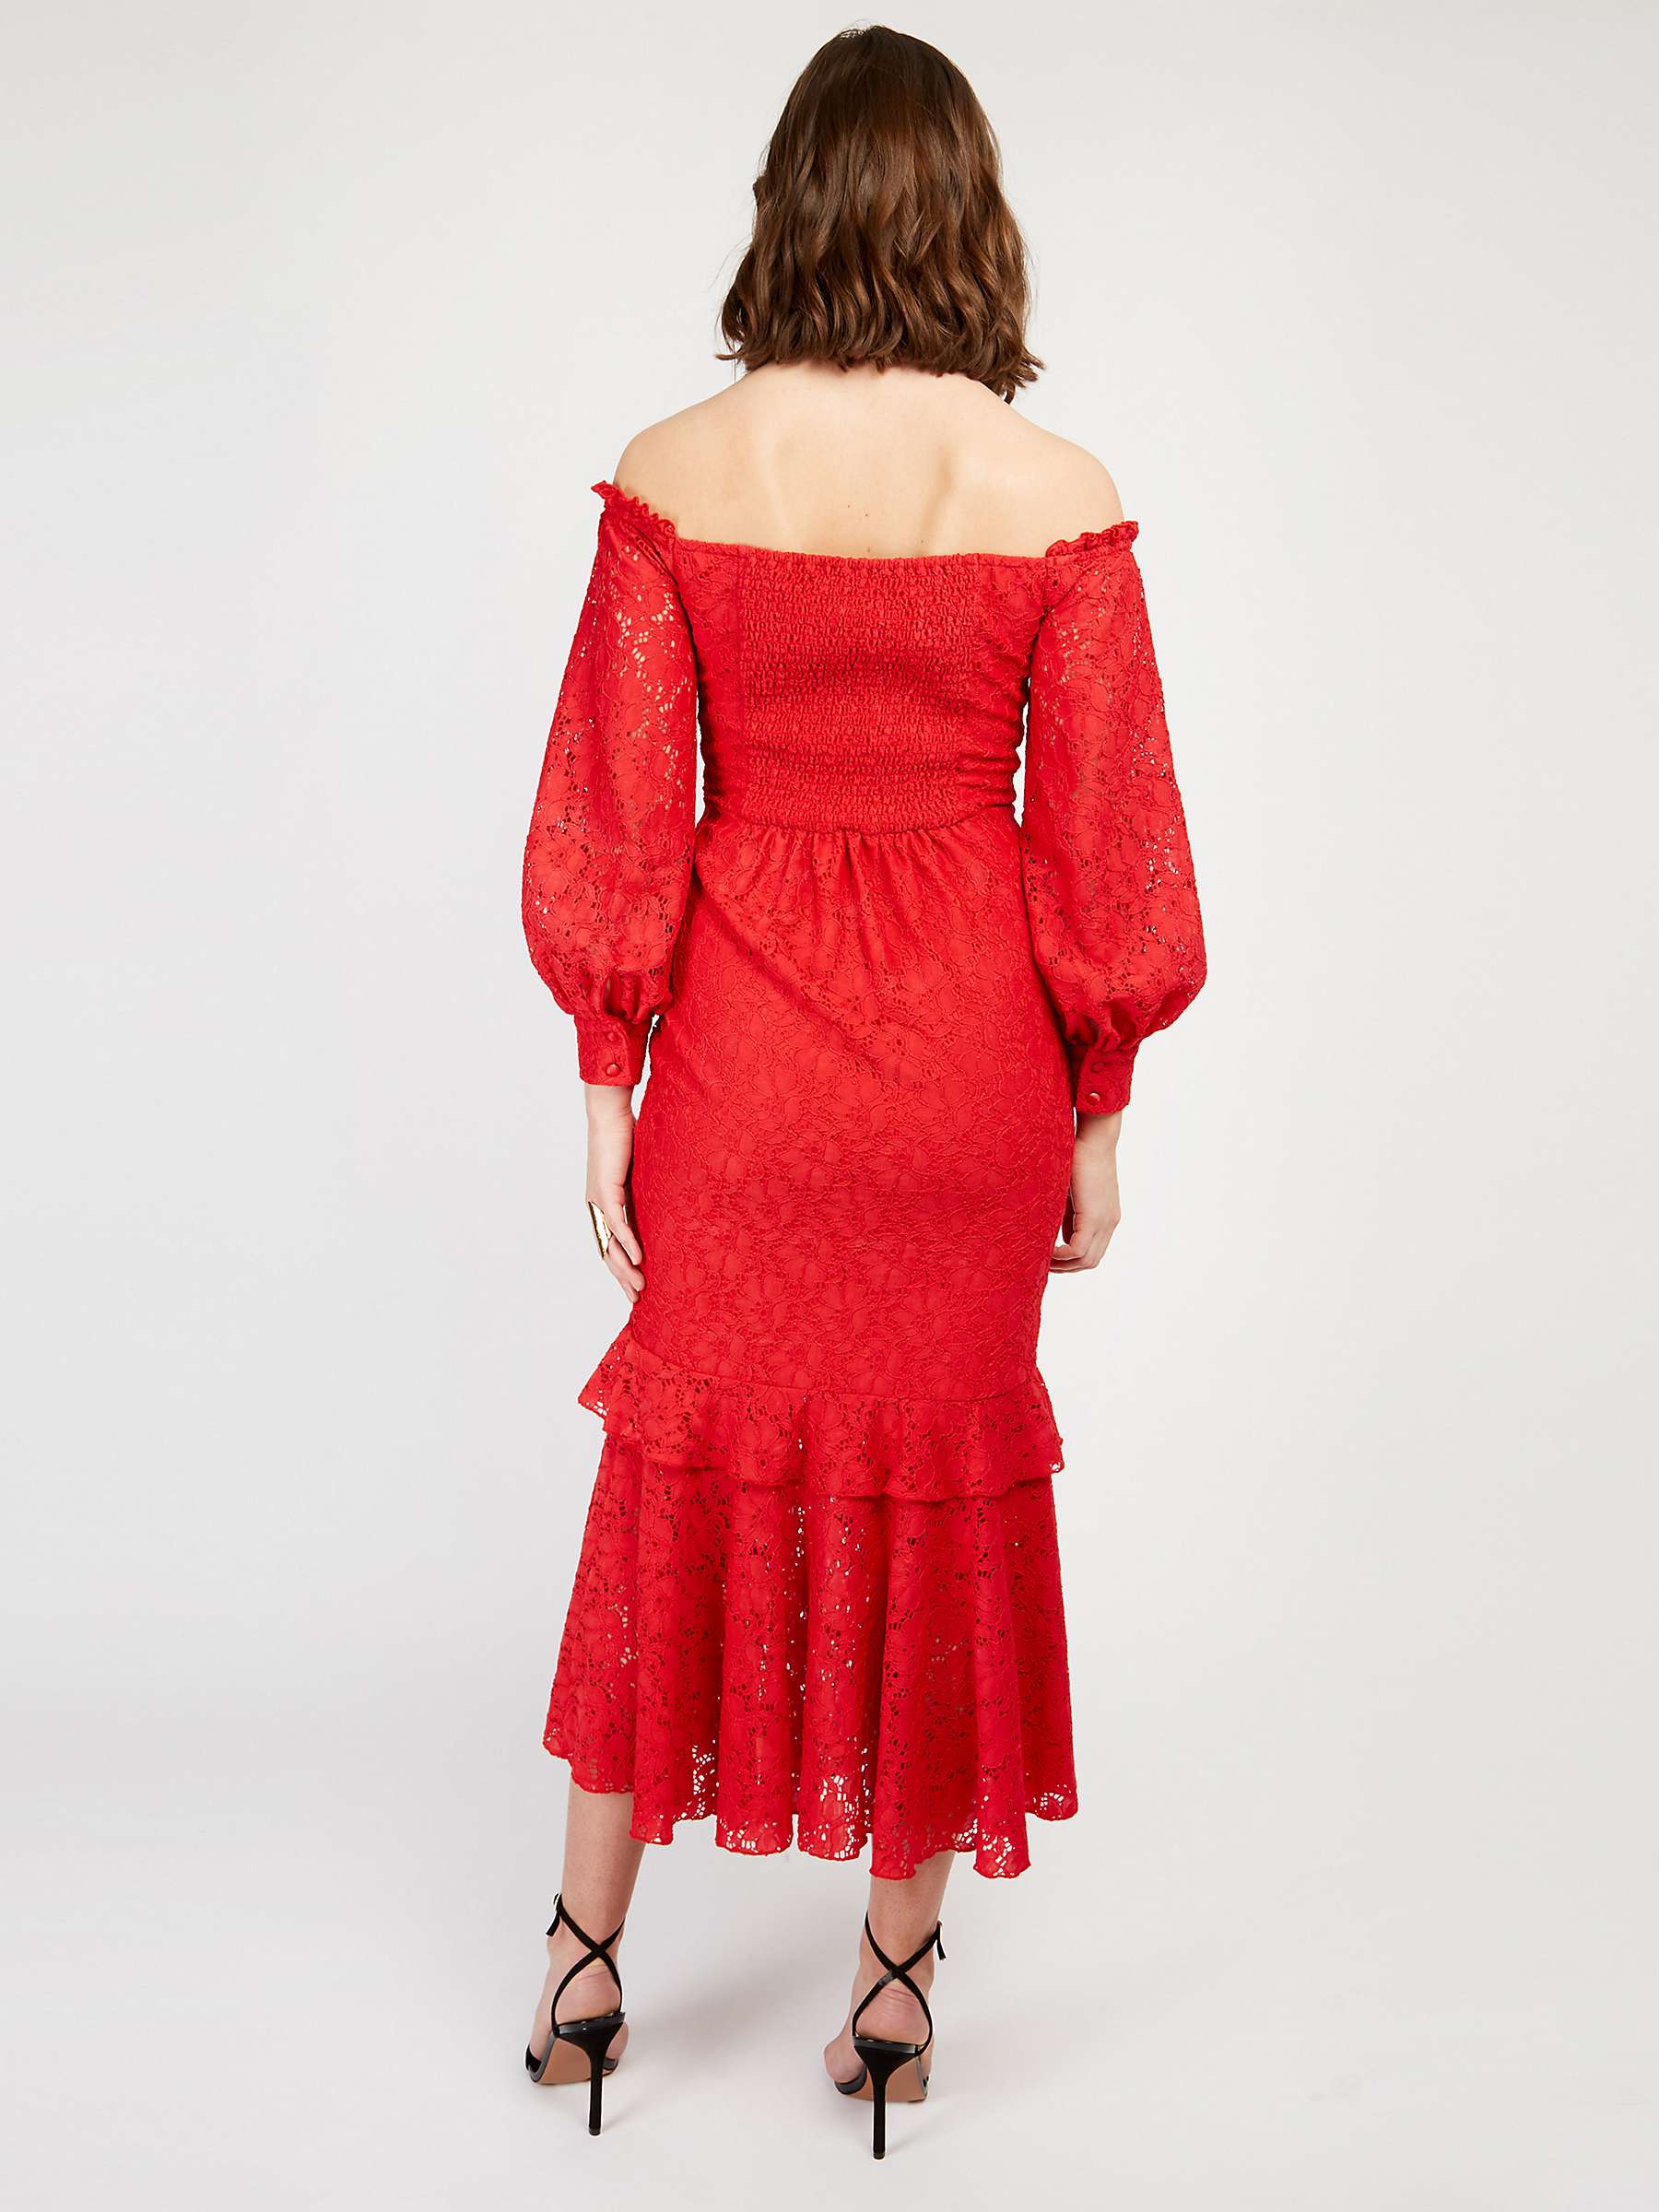 Buy Little Mistress Lace Floral Midaxi Dress, Red Online at johnlewis.com